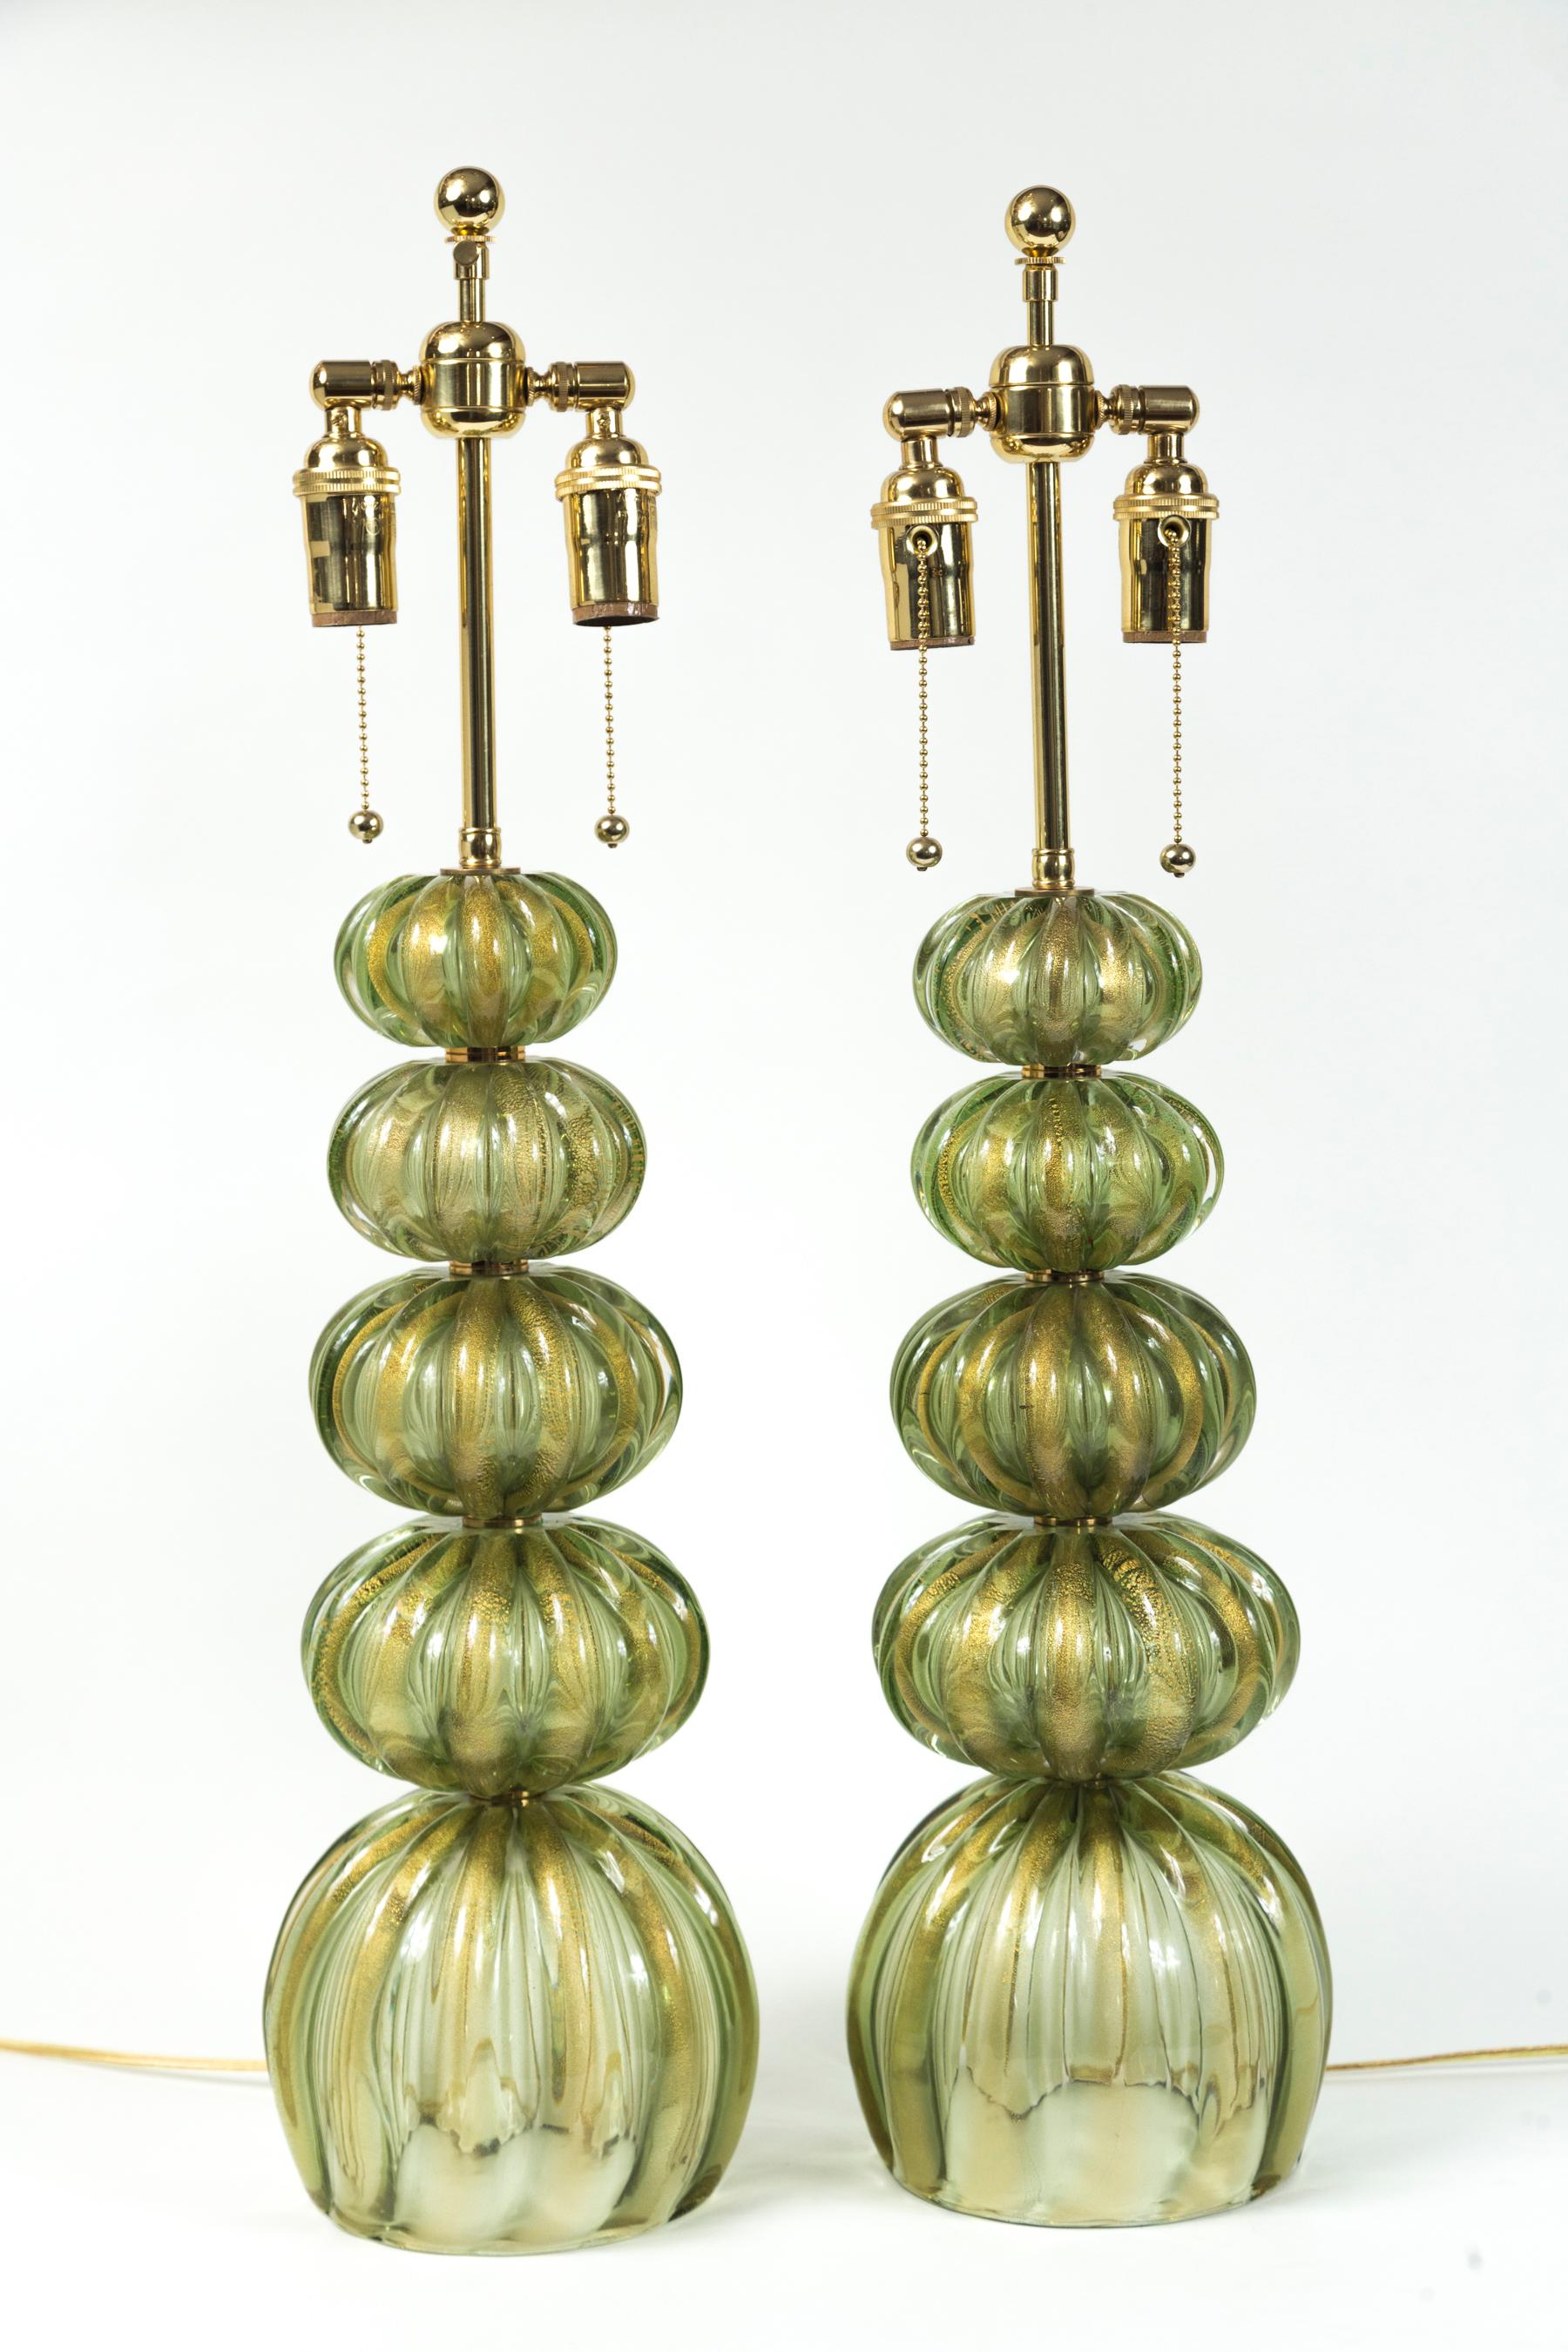 Stunning pair of gold blown green table lamps by Pauly & C

Origin: Murano, Italy

Glass Dating: 1978-1980ca , lamping reconfigured and lamping in polished brass

Dimensions: Glass 8? diameter

Lamp height to the top of the glass 19?

Lamp